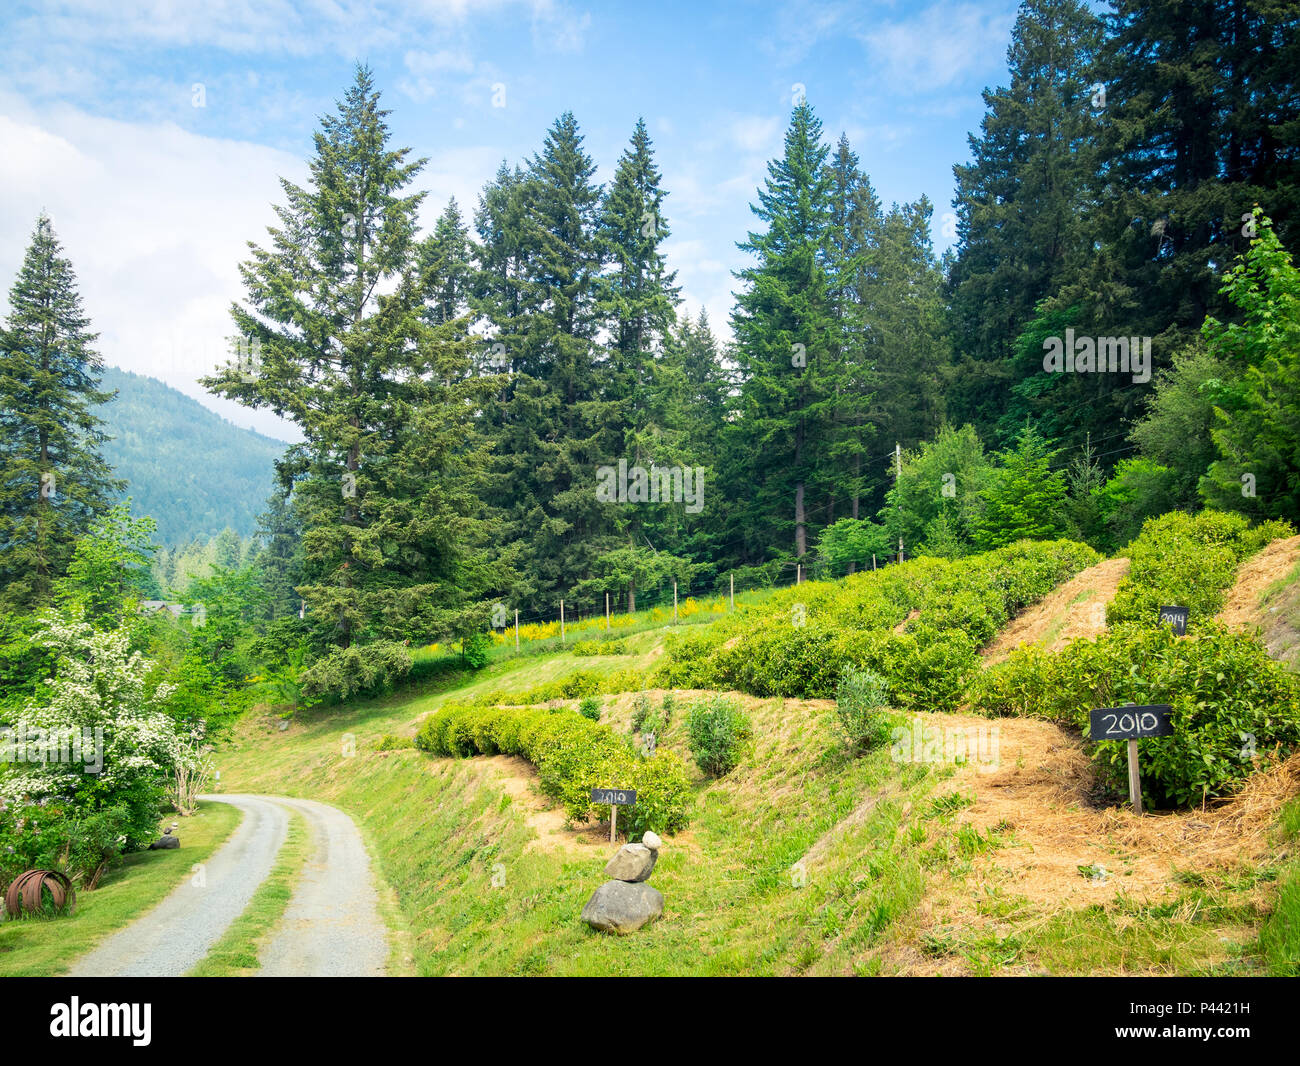 A view of the gorgeous Westholme Tea Farm, Canada's only commercial tea growing farm, near Duncan, British Columbia, Canada. Stock Photo